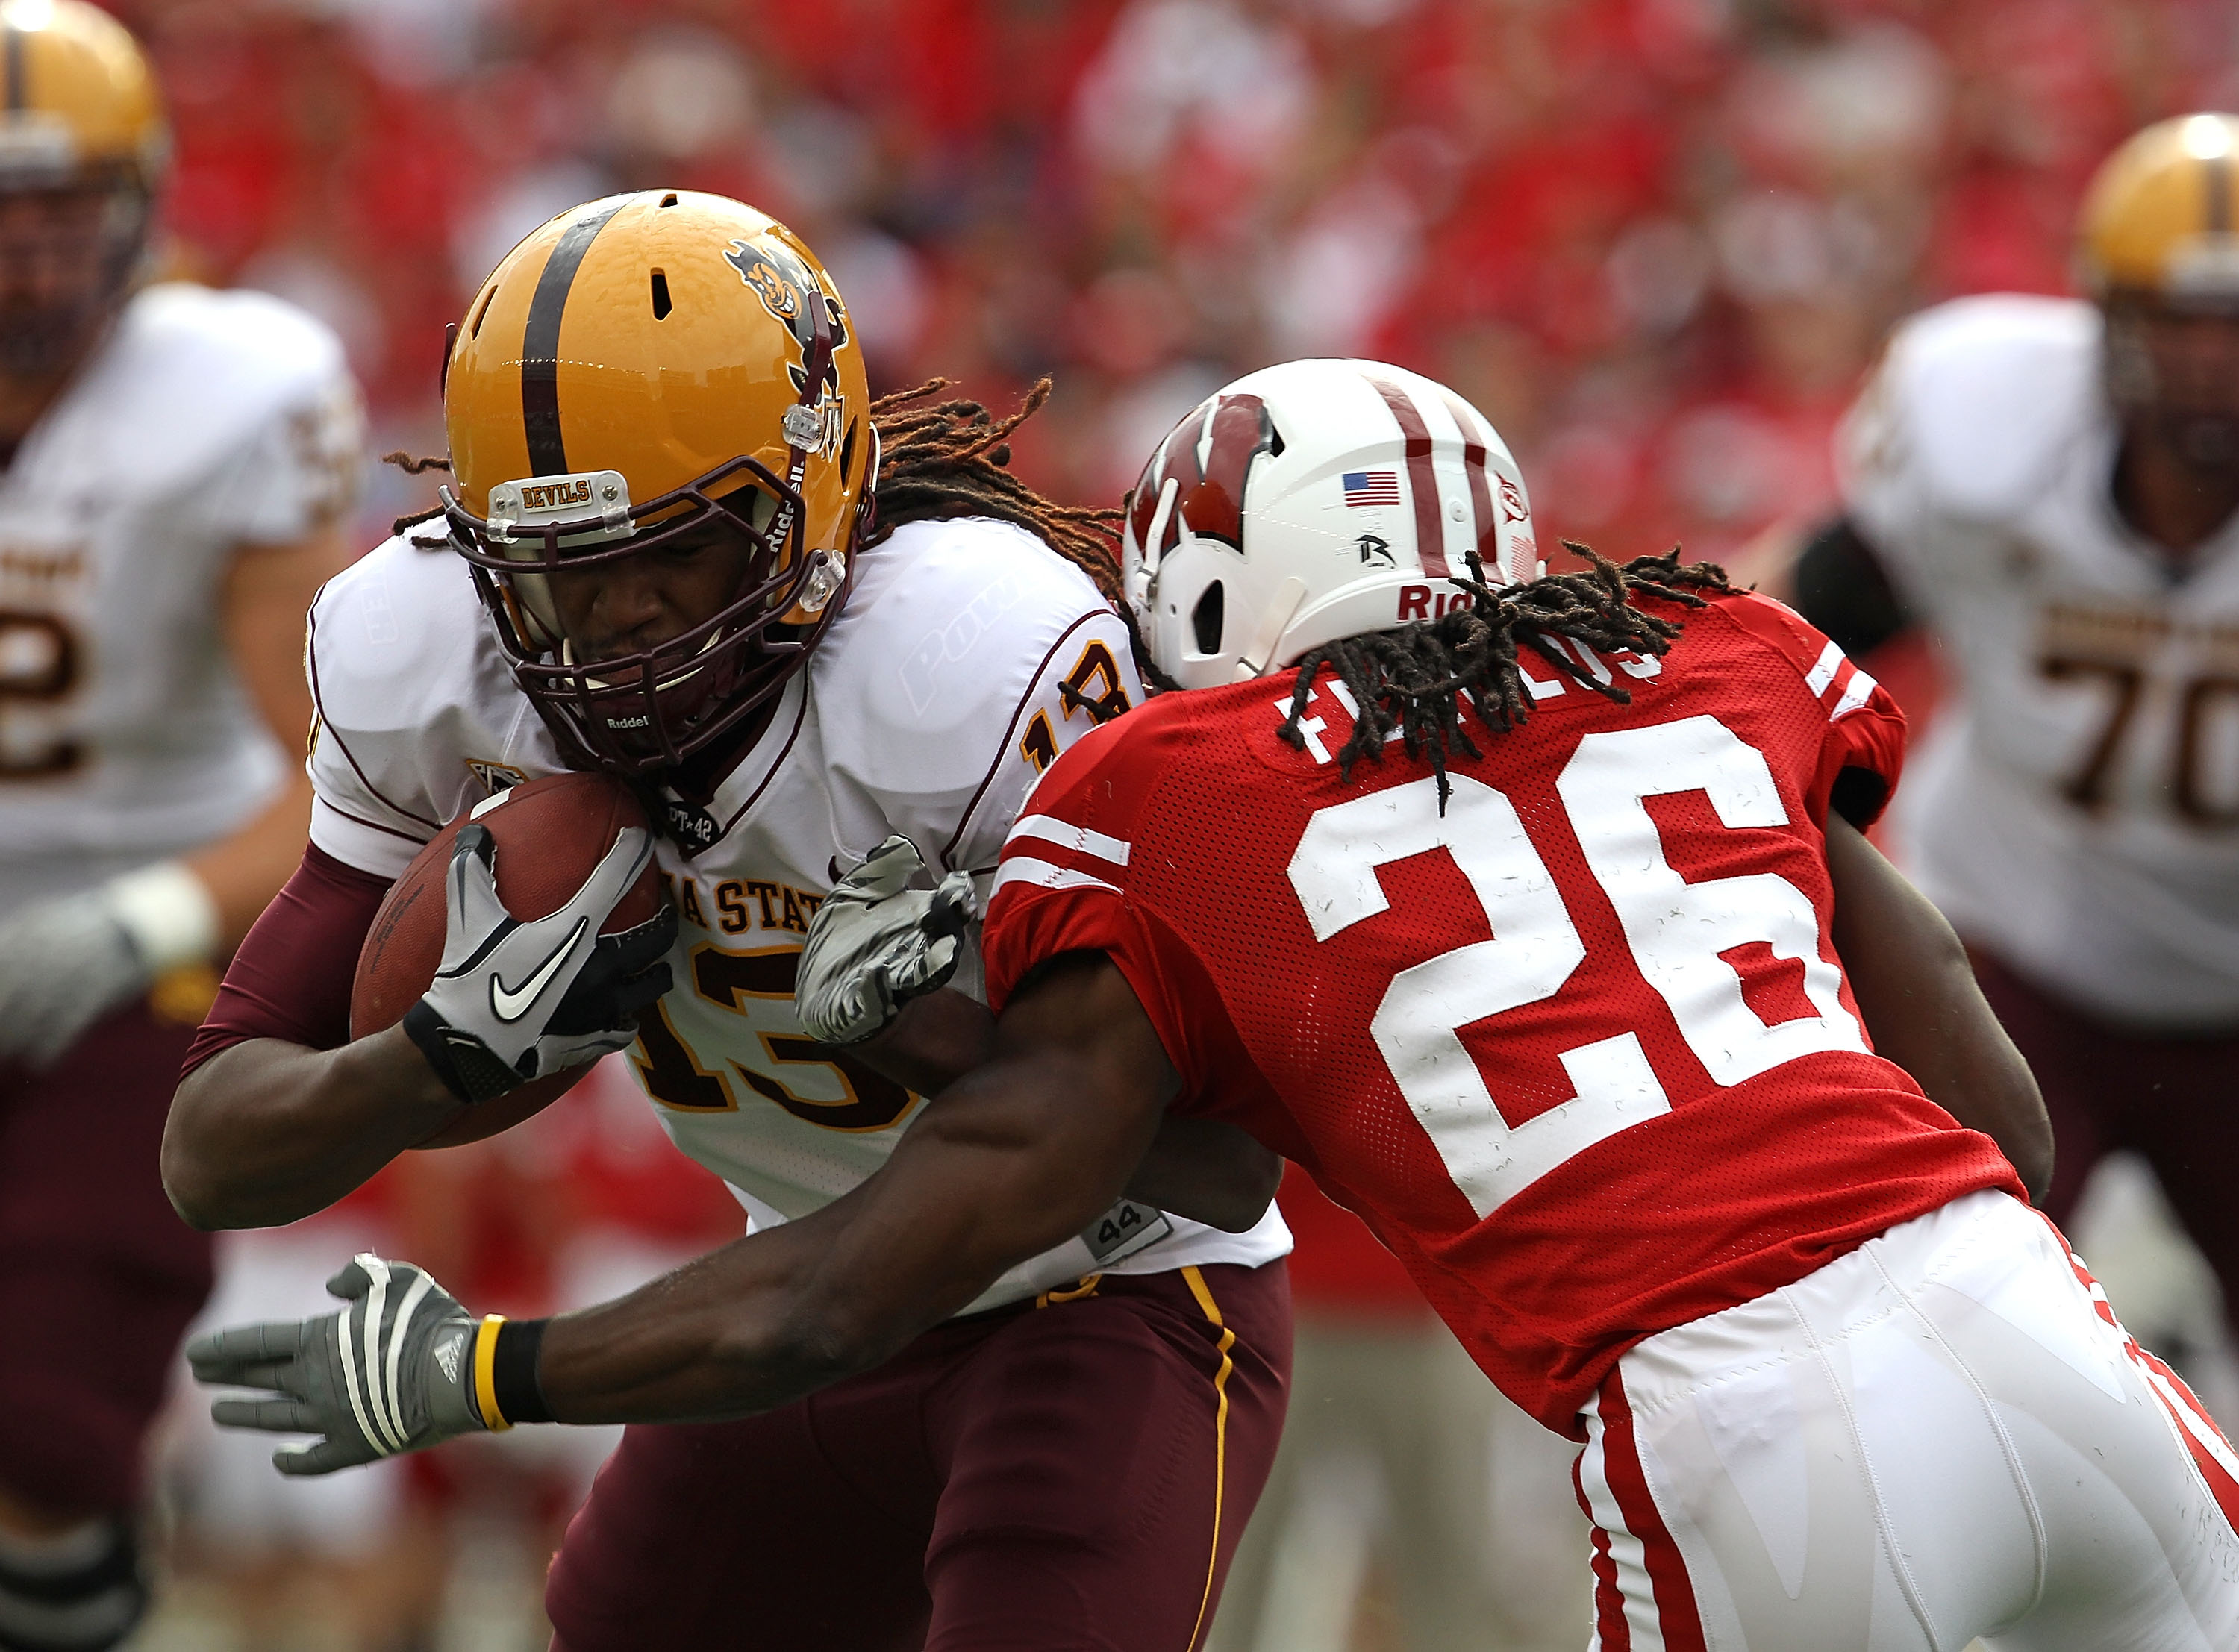 MADISON, WI - SEPTEMBER 18: George Bell #13 of the Arizona State Sun Devils looks for running room after catching a pass for a first down as Antonio Fenelus #26 of the Wisconsin Badgers closes in at Camp Randall Stadium on September 18, 2010 in Madison, W